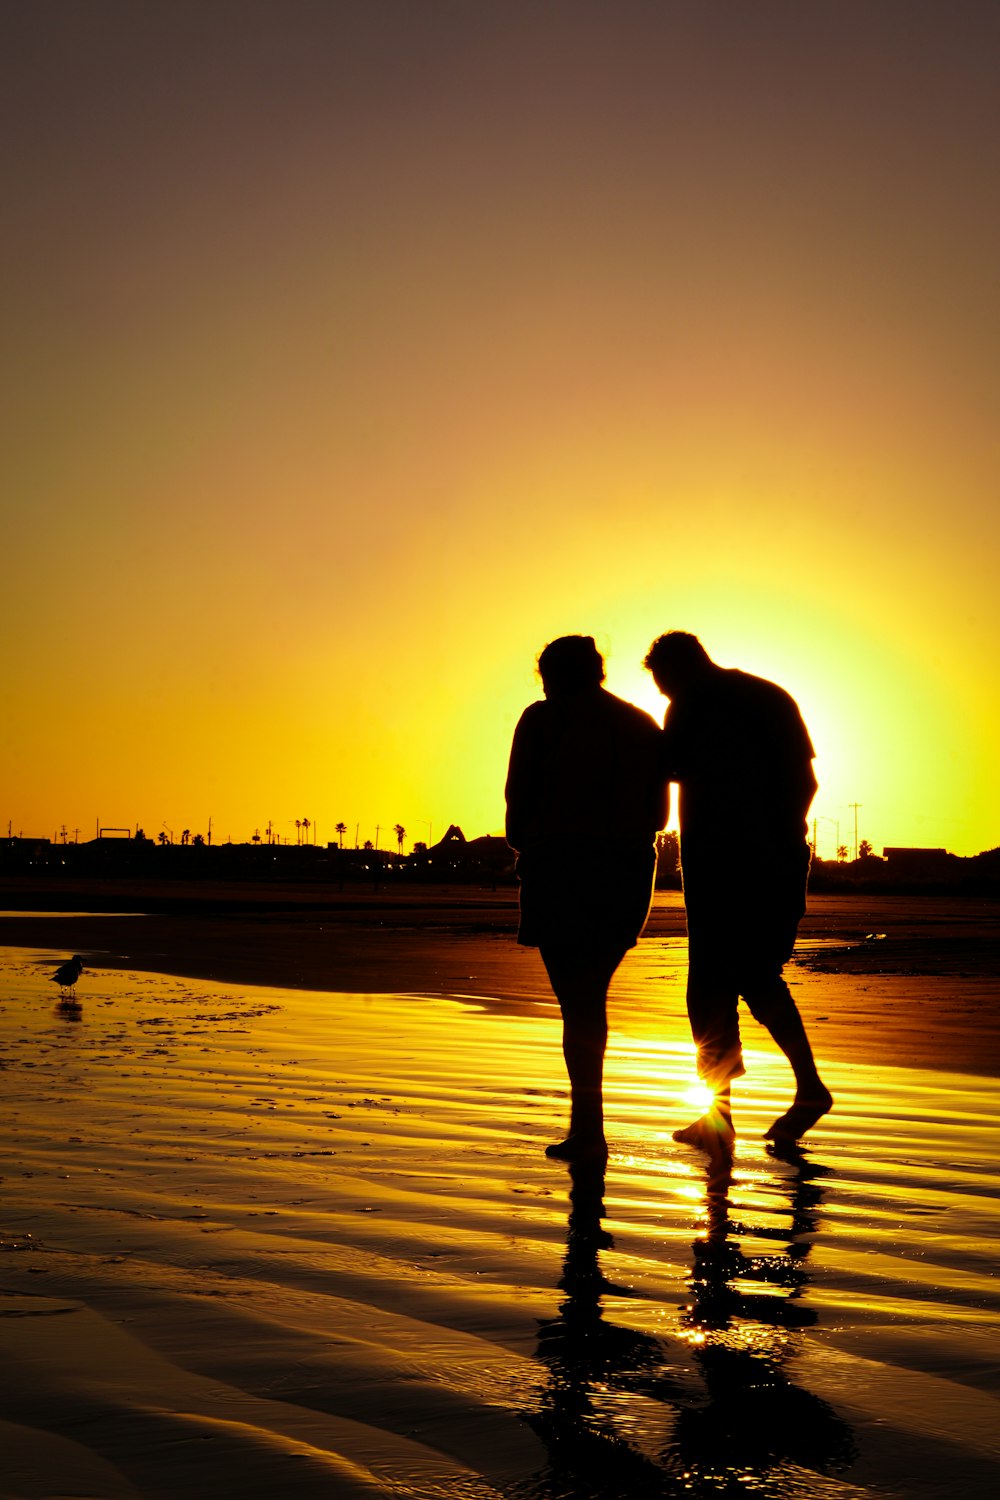 two people walking on a beach at sunset